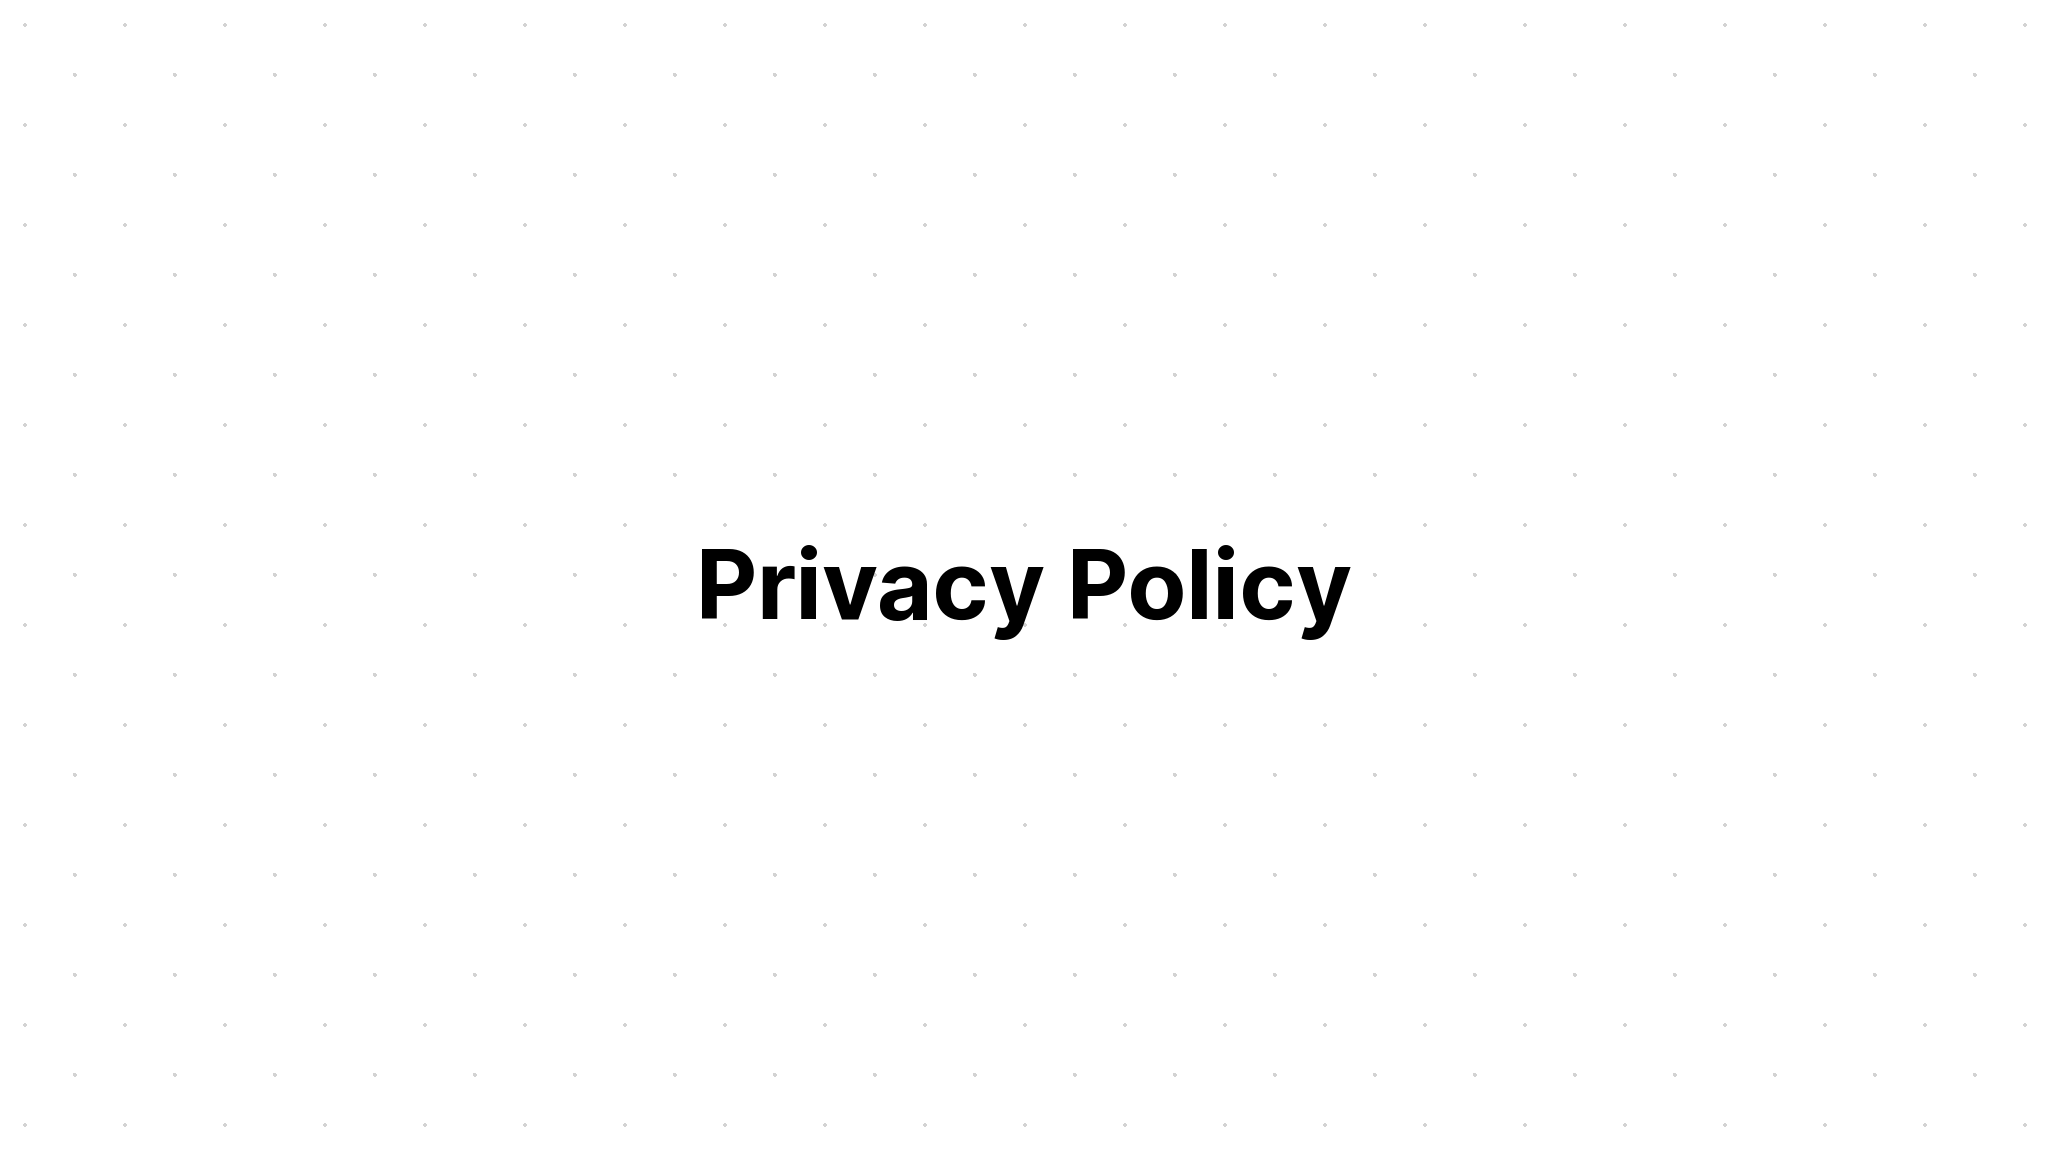 Privacy Policy. Дизайн для privacy Policy. Privacy Policy для сайта. Privacy Policy Page beautiful.